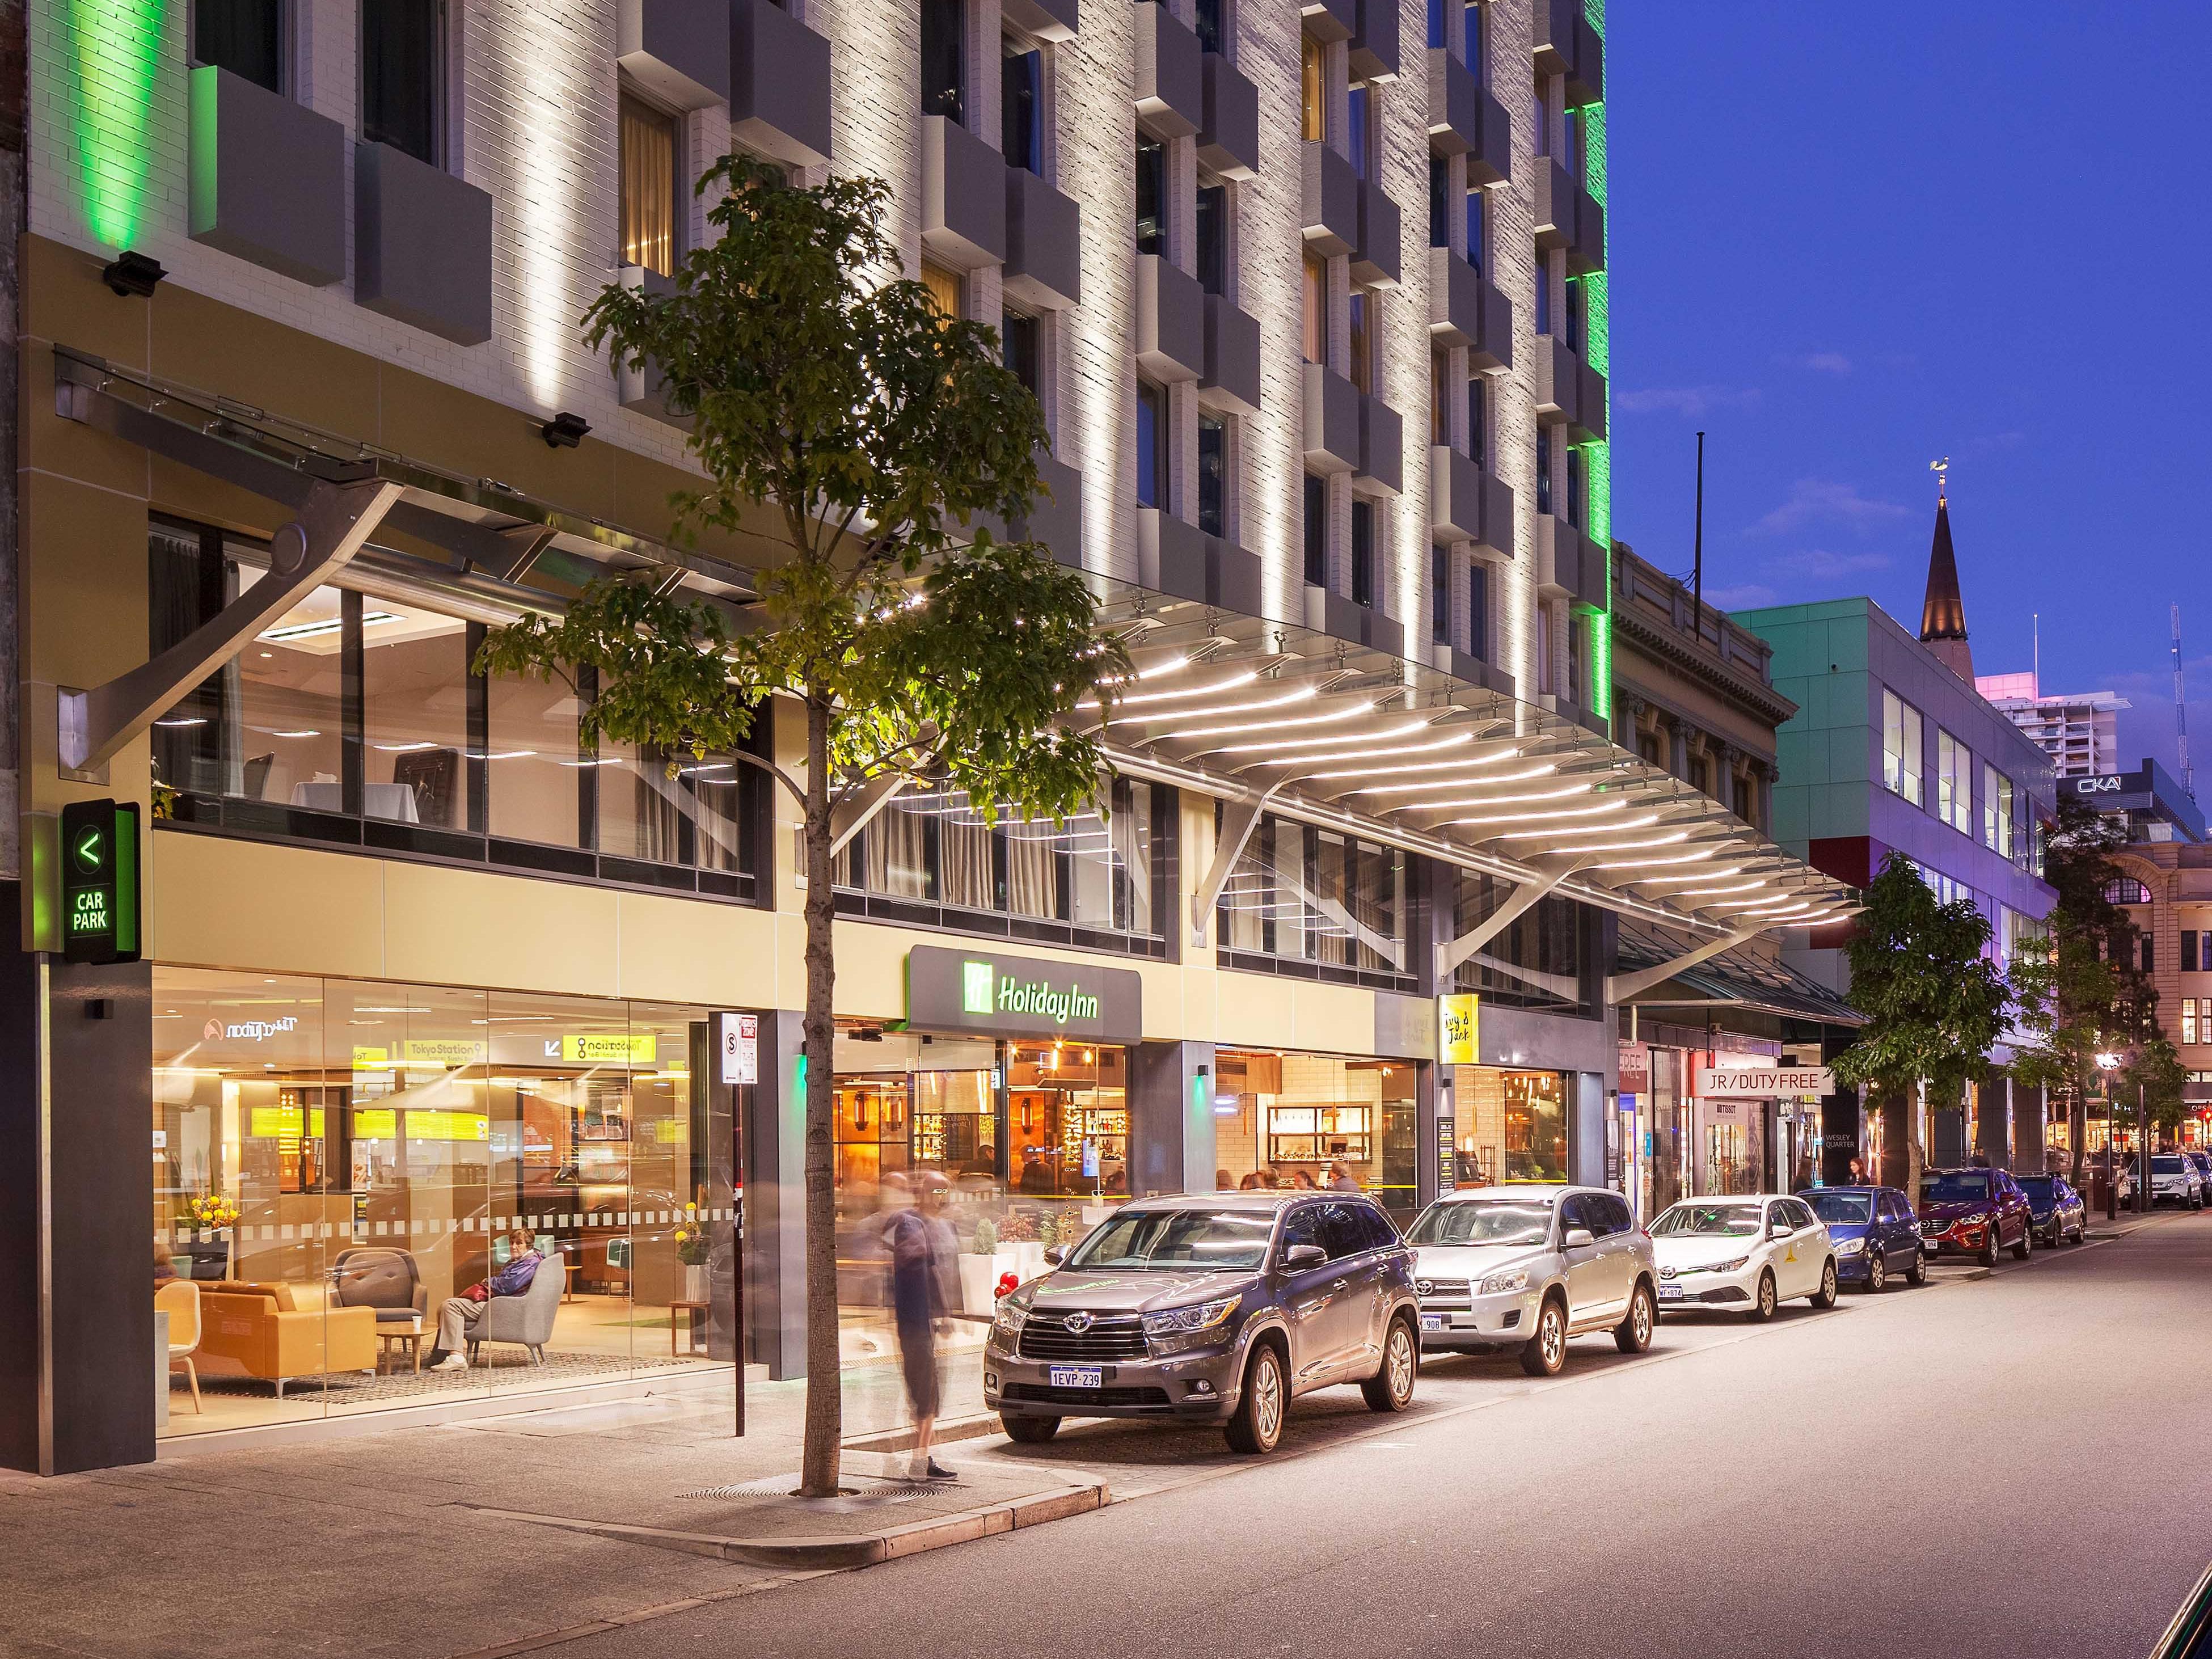 With Perth's best attractions, entertainment, dining and shopping at its doorstep, Holiday Inn Perth City Centre is the ideal place to stay while exploring our beautiful city.
Heading to a concert or show? We are perfectly situated just a short walk away from Perth Arena and short train ride to Optus Stadium.